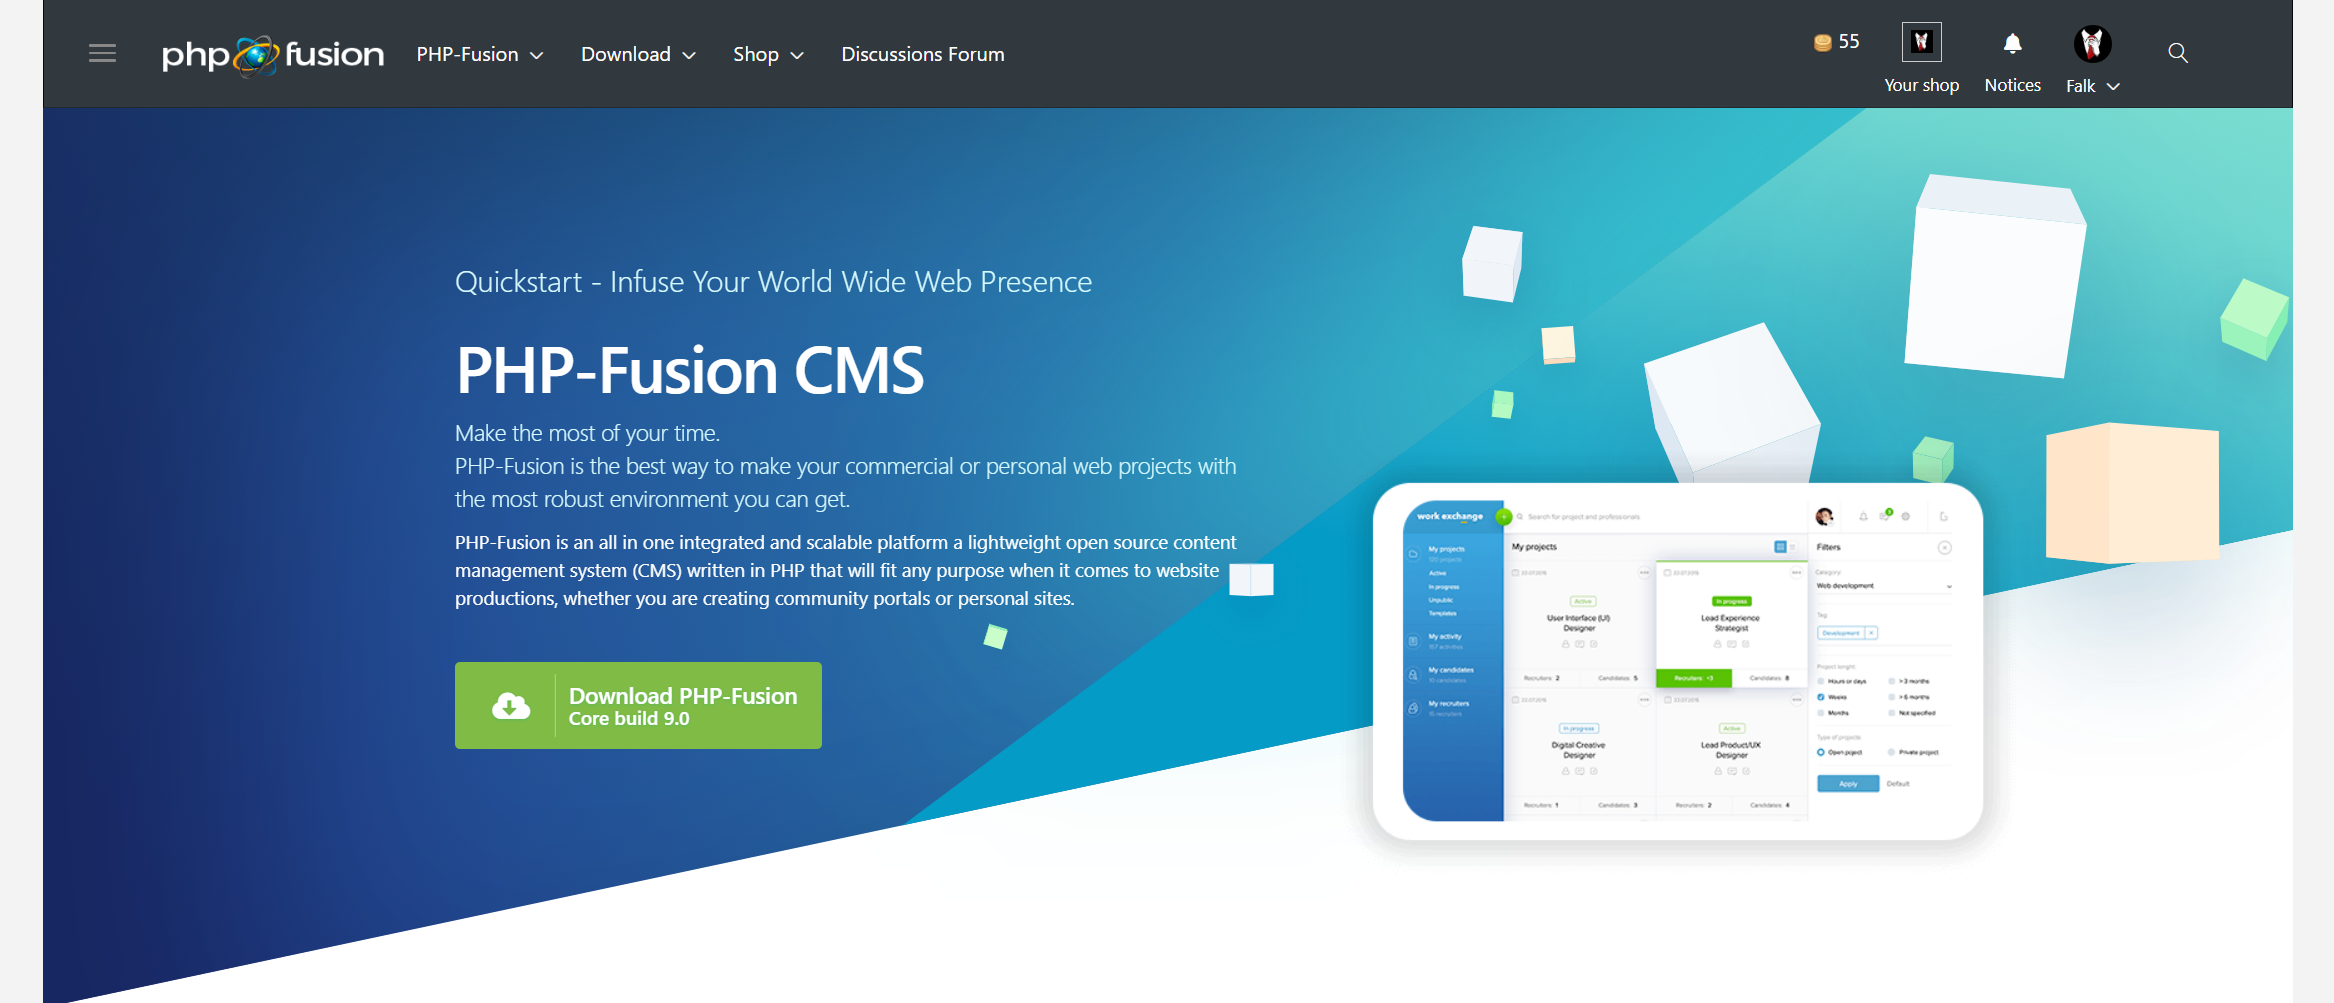 Forum php dl. Php-Fusion. Php download. Cms php. Open source cms.